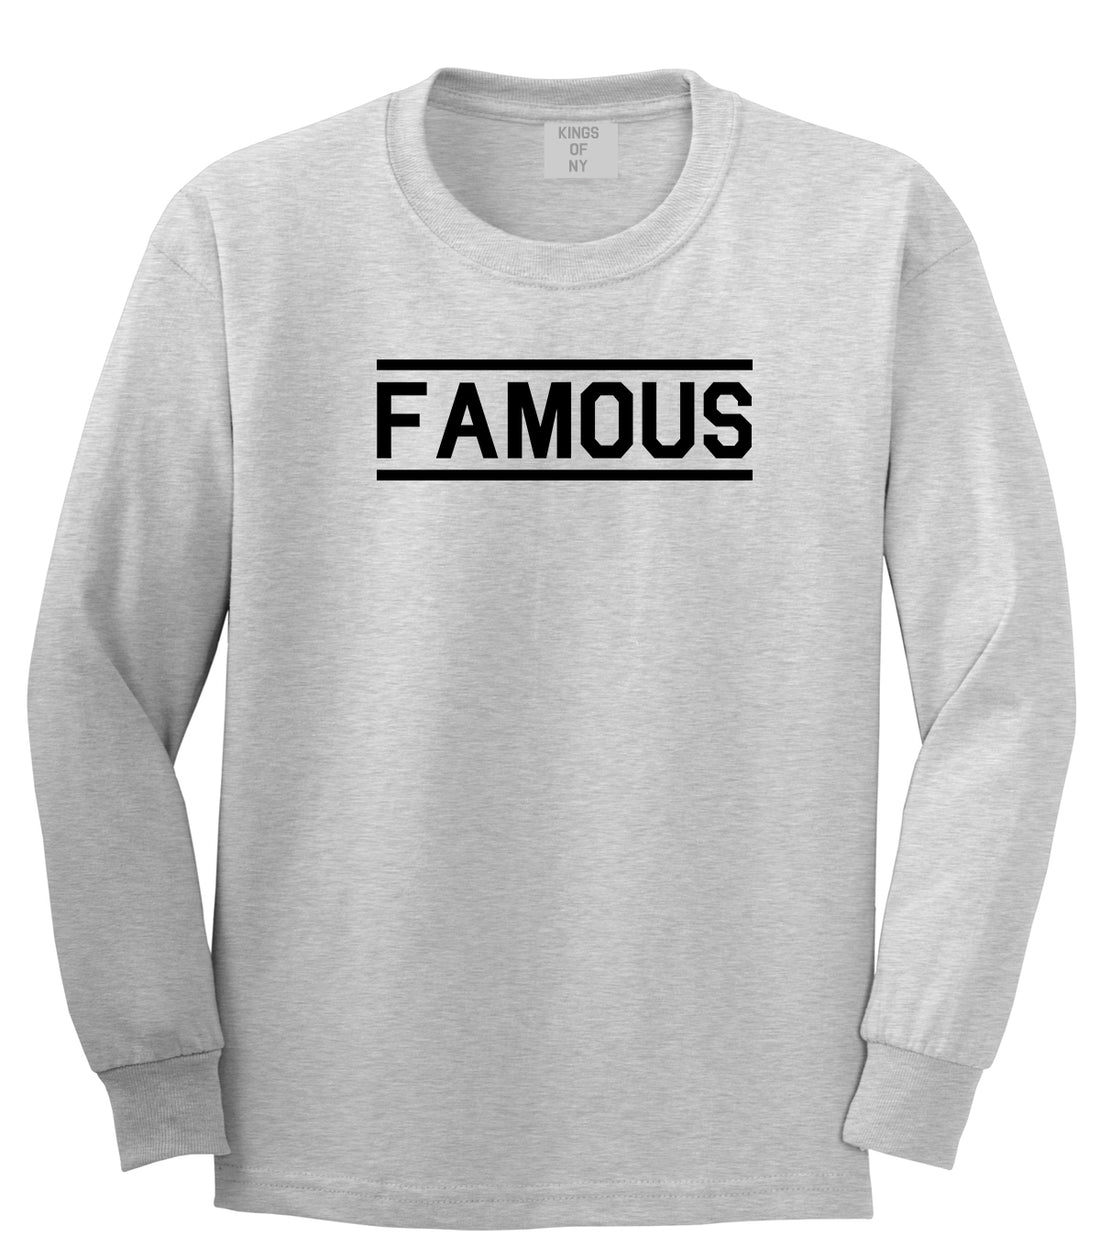 Famous Mens Grey Long Sleeve T-Shirt by KINGS OF NY